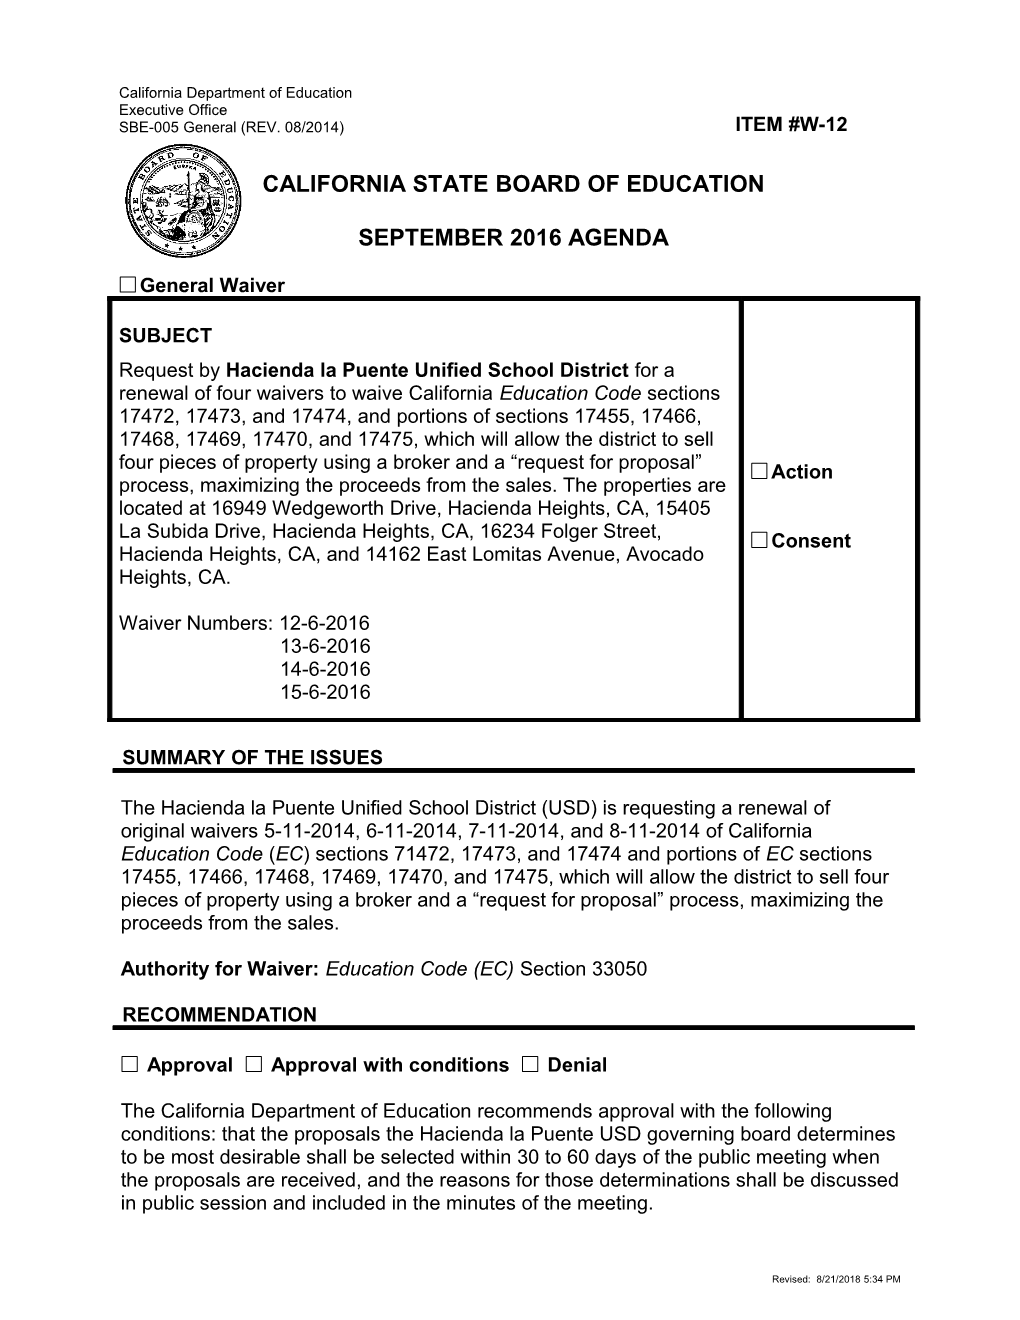 September 2016 Waiver Item W-12 - Meeting Agendas (CA State Board of Education)